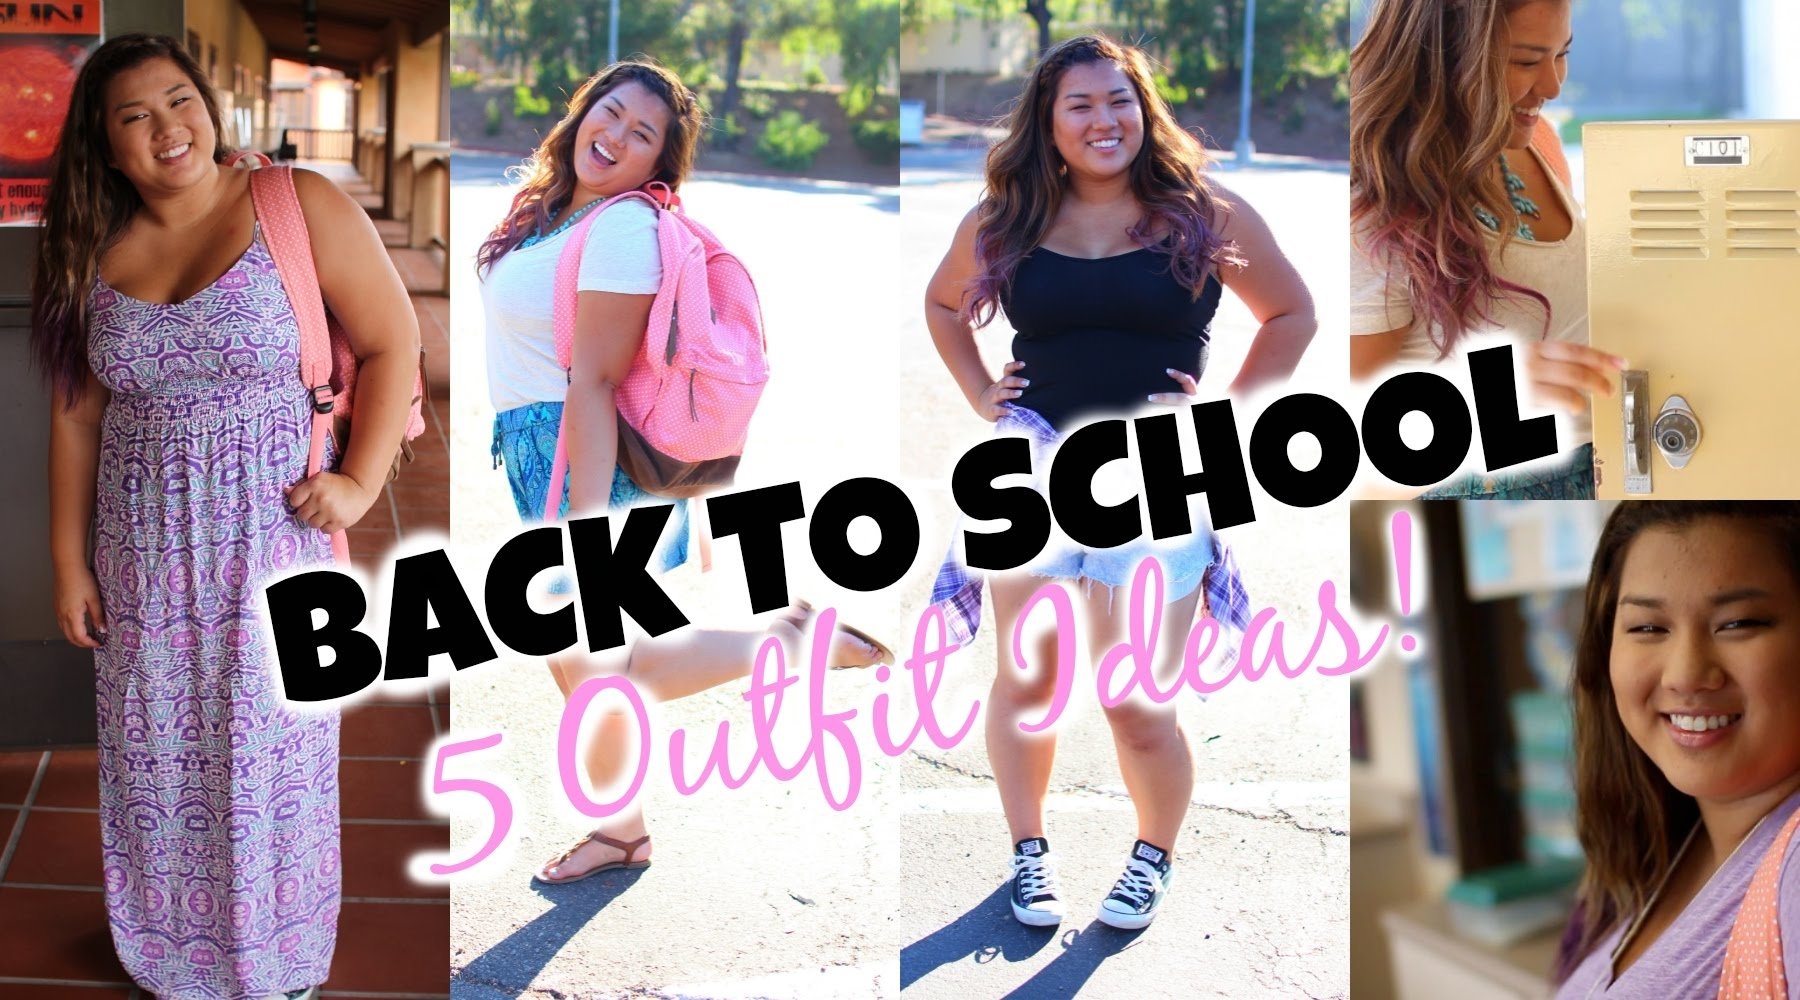 10 Trendy Cute Teenage Outfit Ideas For School 5 back to school outfit ideas cute easy affordable youtube 1 2022